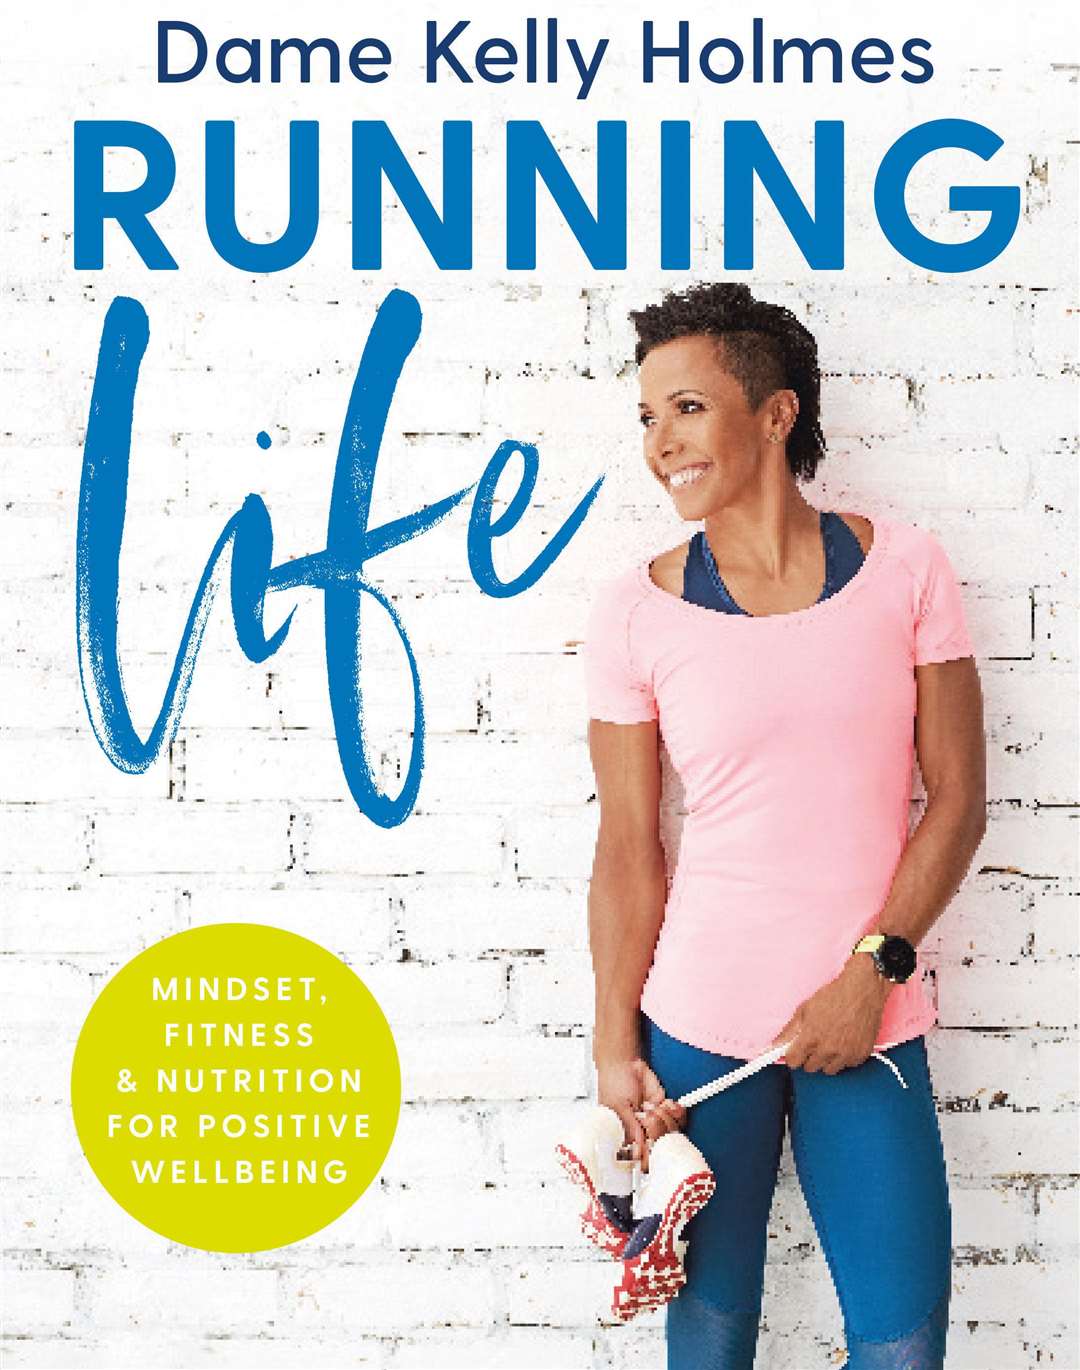 Running Life: Mindset, Fitness & Nutriton For Positive Wellbeing, by Dame Kelly Holmes, Picture: Peter Cassidy/Running Life/Kyle Books/PA